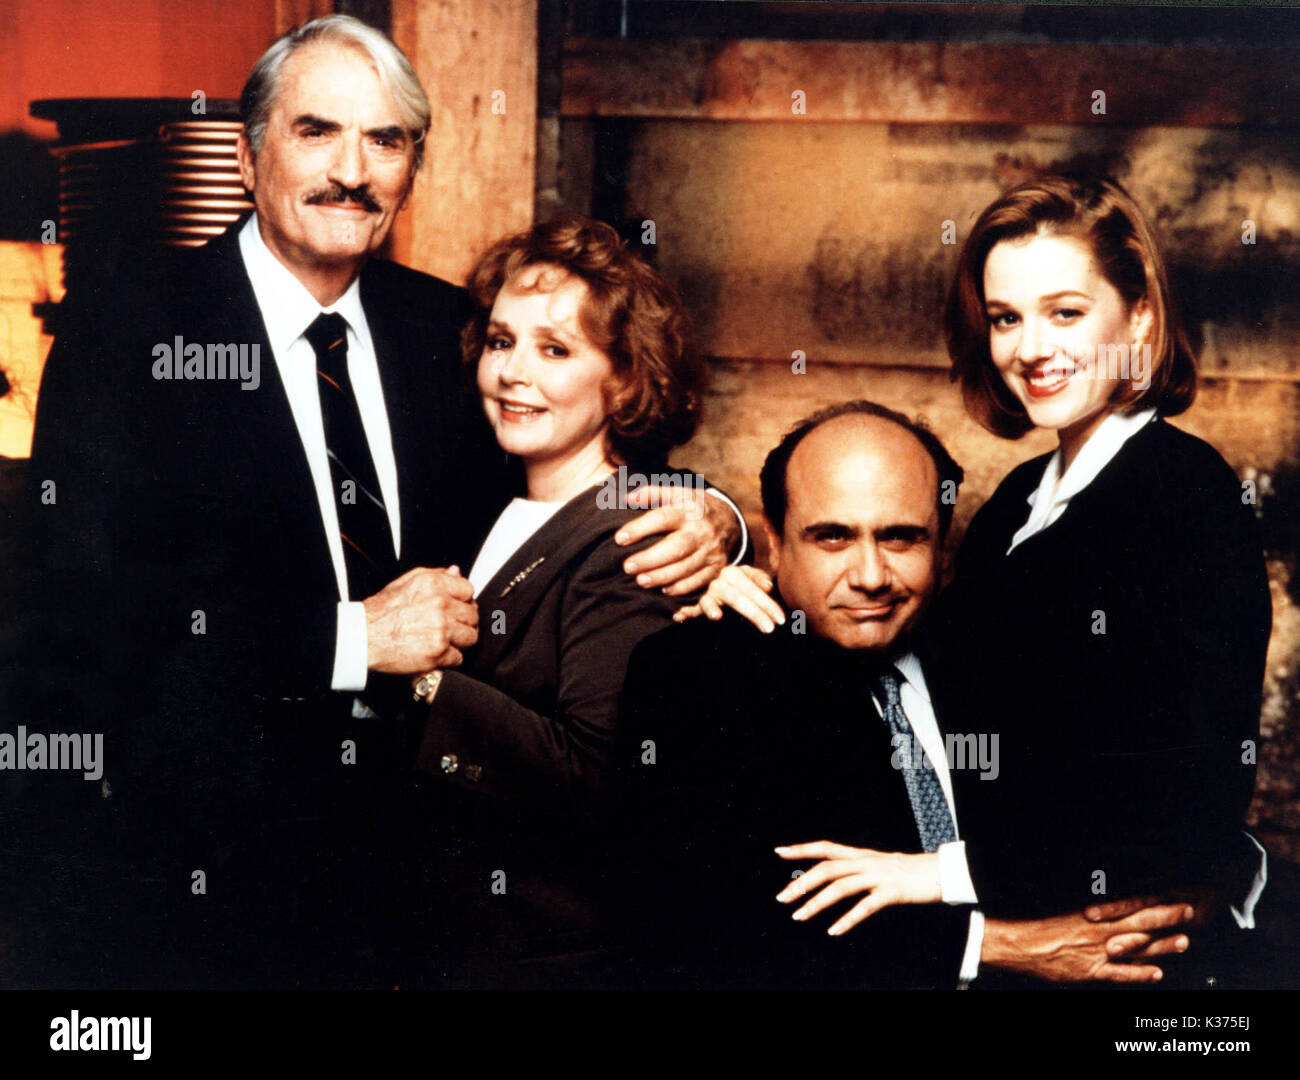 OTHER PEOPLE'S MONEY (US1991) GREGORY PECK, PIPER LAURIE, DANNY DE VITO, PENELOPE ANN MIILLER     Date: 1991 Stock Photo